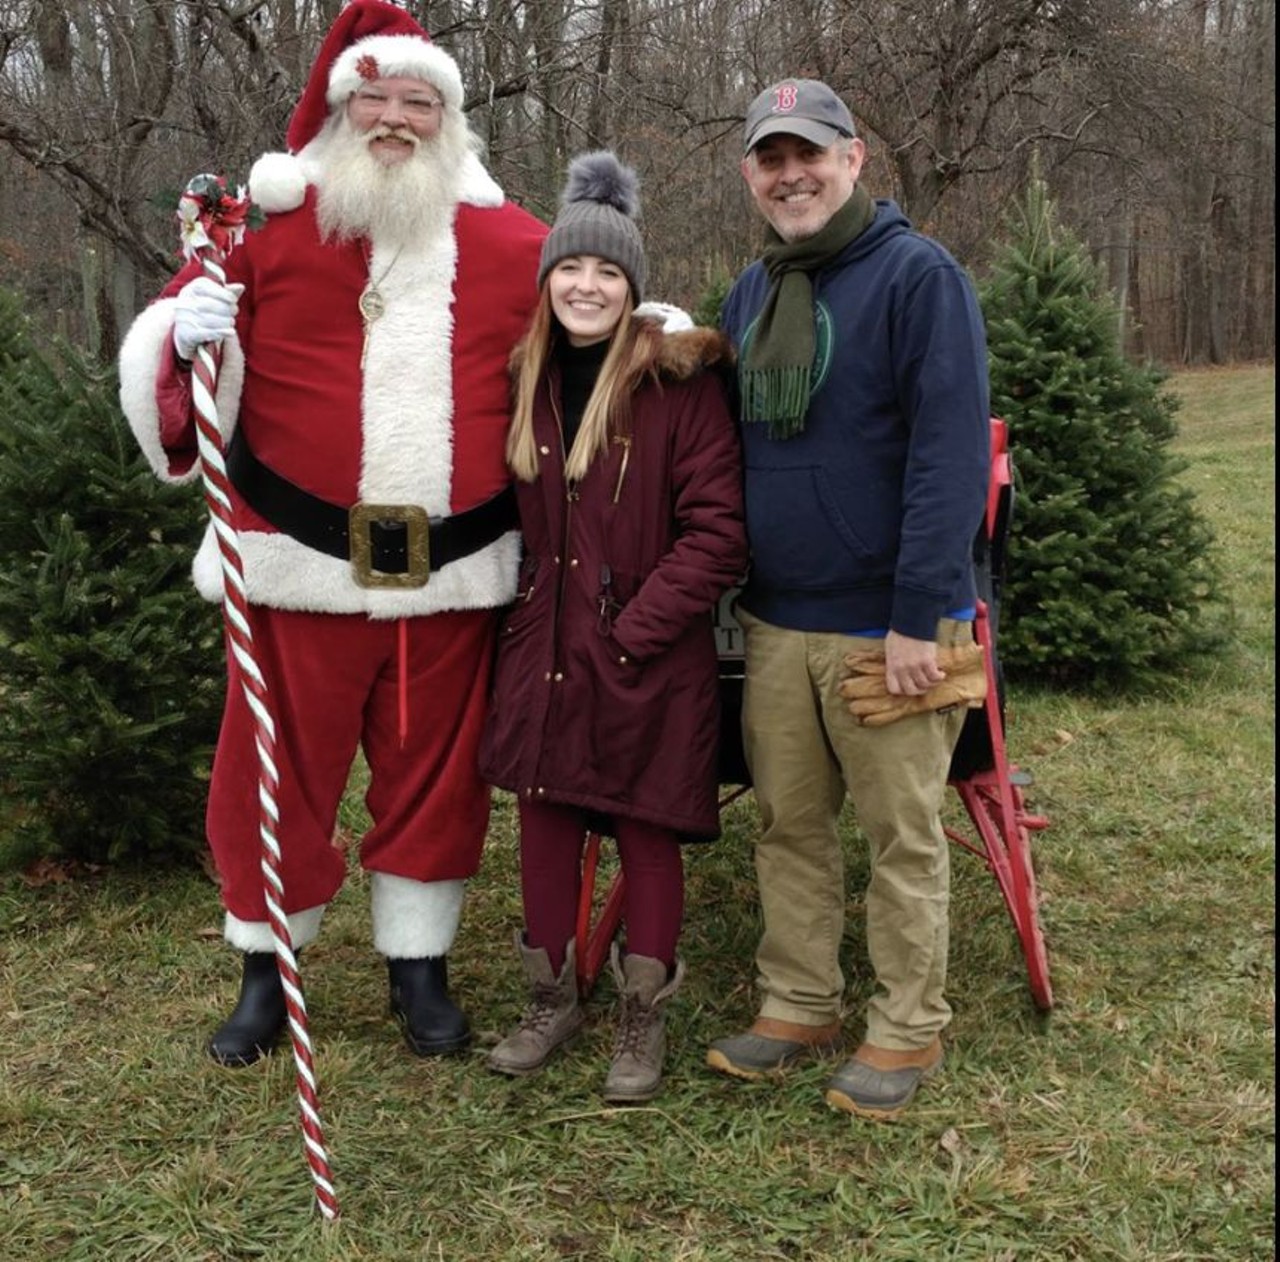  Mountain Creek Tree Farm
7185 Williams Rd., Concord
Out in Lake County, Mountain Creek Tree Farm has been selling Christmas trees since 1949. The spot is dog-friendly, seven types of trees. Santa is coming this year Nov. 29-Dec. 1 and Dec. 7-8 and Dec. 14-15, all from 10 a.m.-2 p.m. 
Photo via Mountain Creek Tree Farm/Facebook